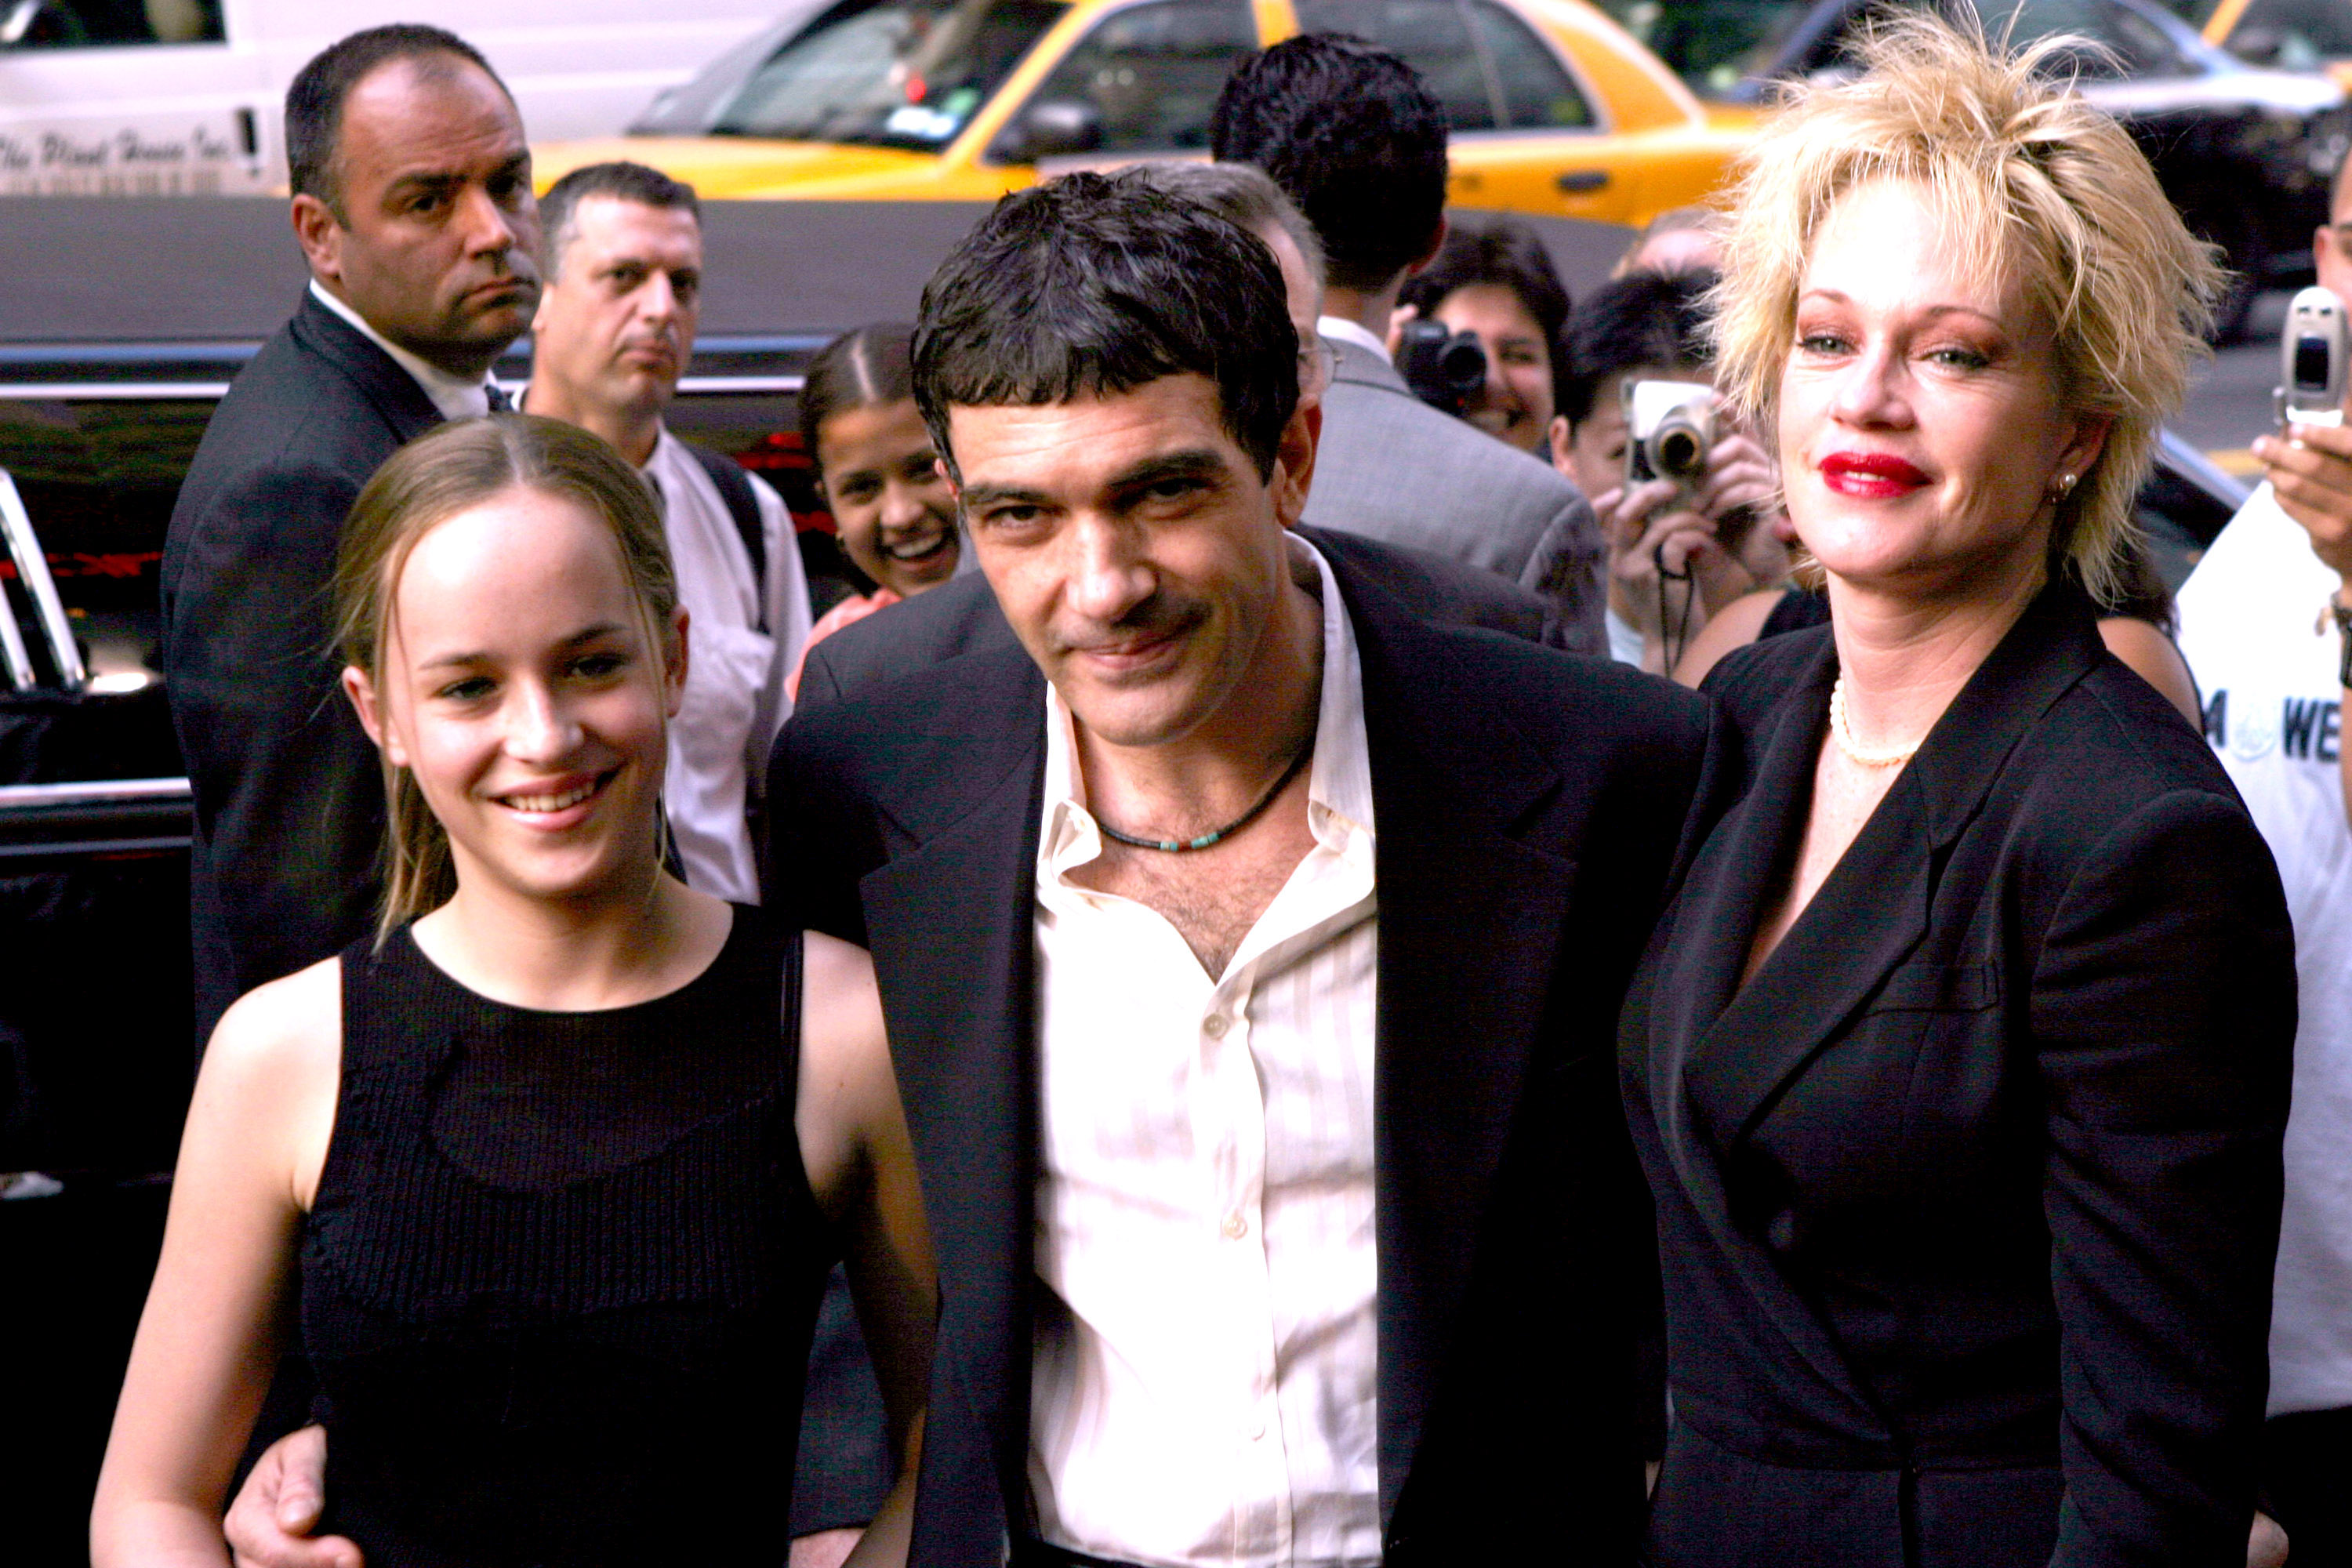 Dakota Johnson, Antonio Banderas and Melanie Griffith at the New York premiere of "And Starring Pancho Villa As Himself" on August 18, 2003. | Source: Getty Images